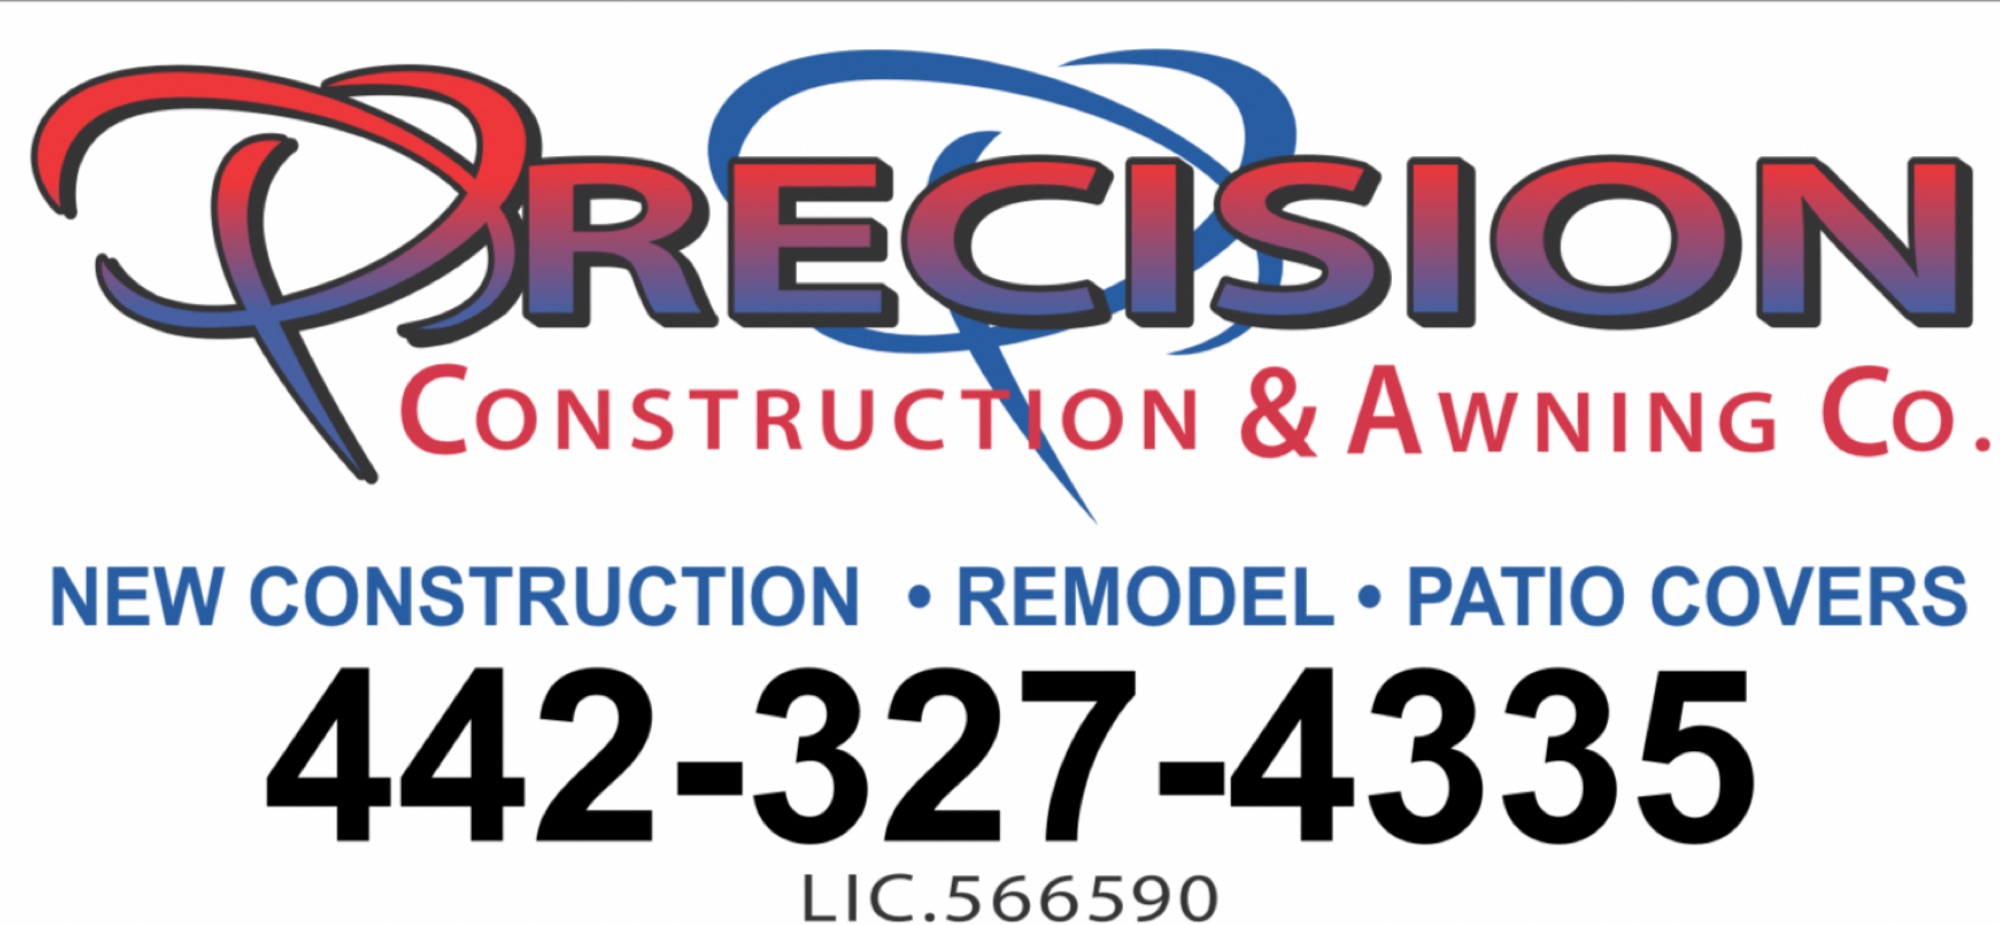 Precision Construction and Awnings Co Logo